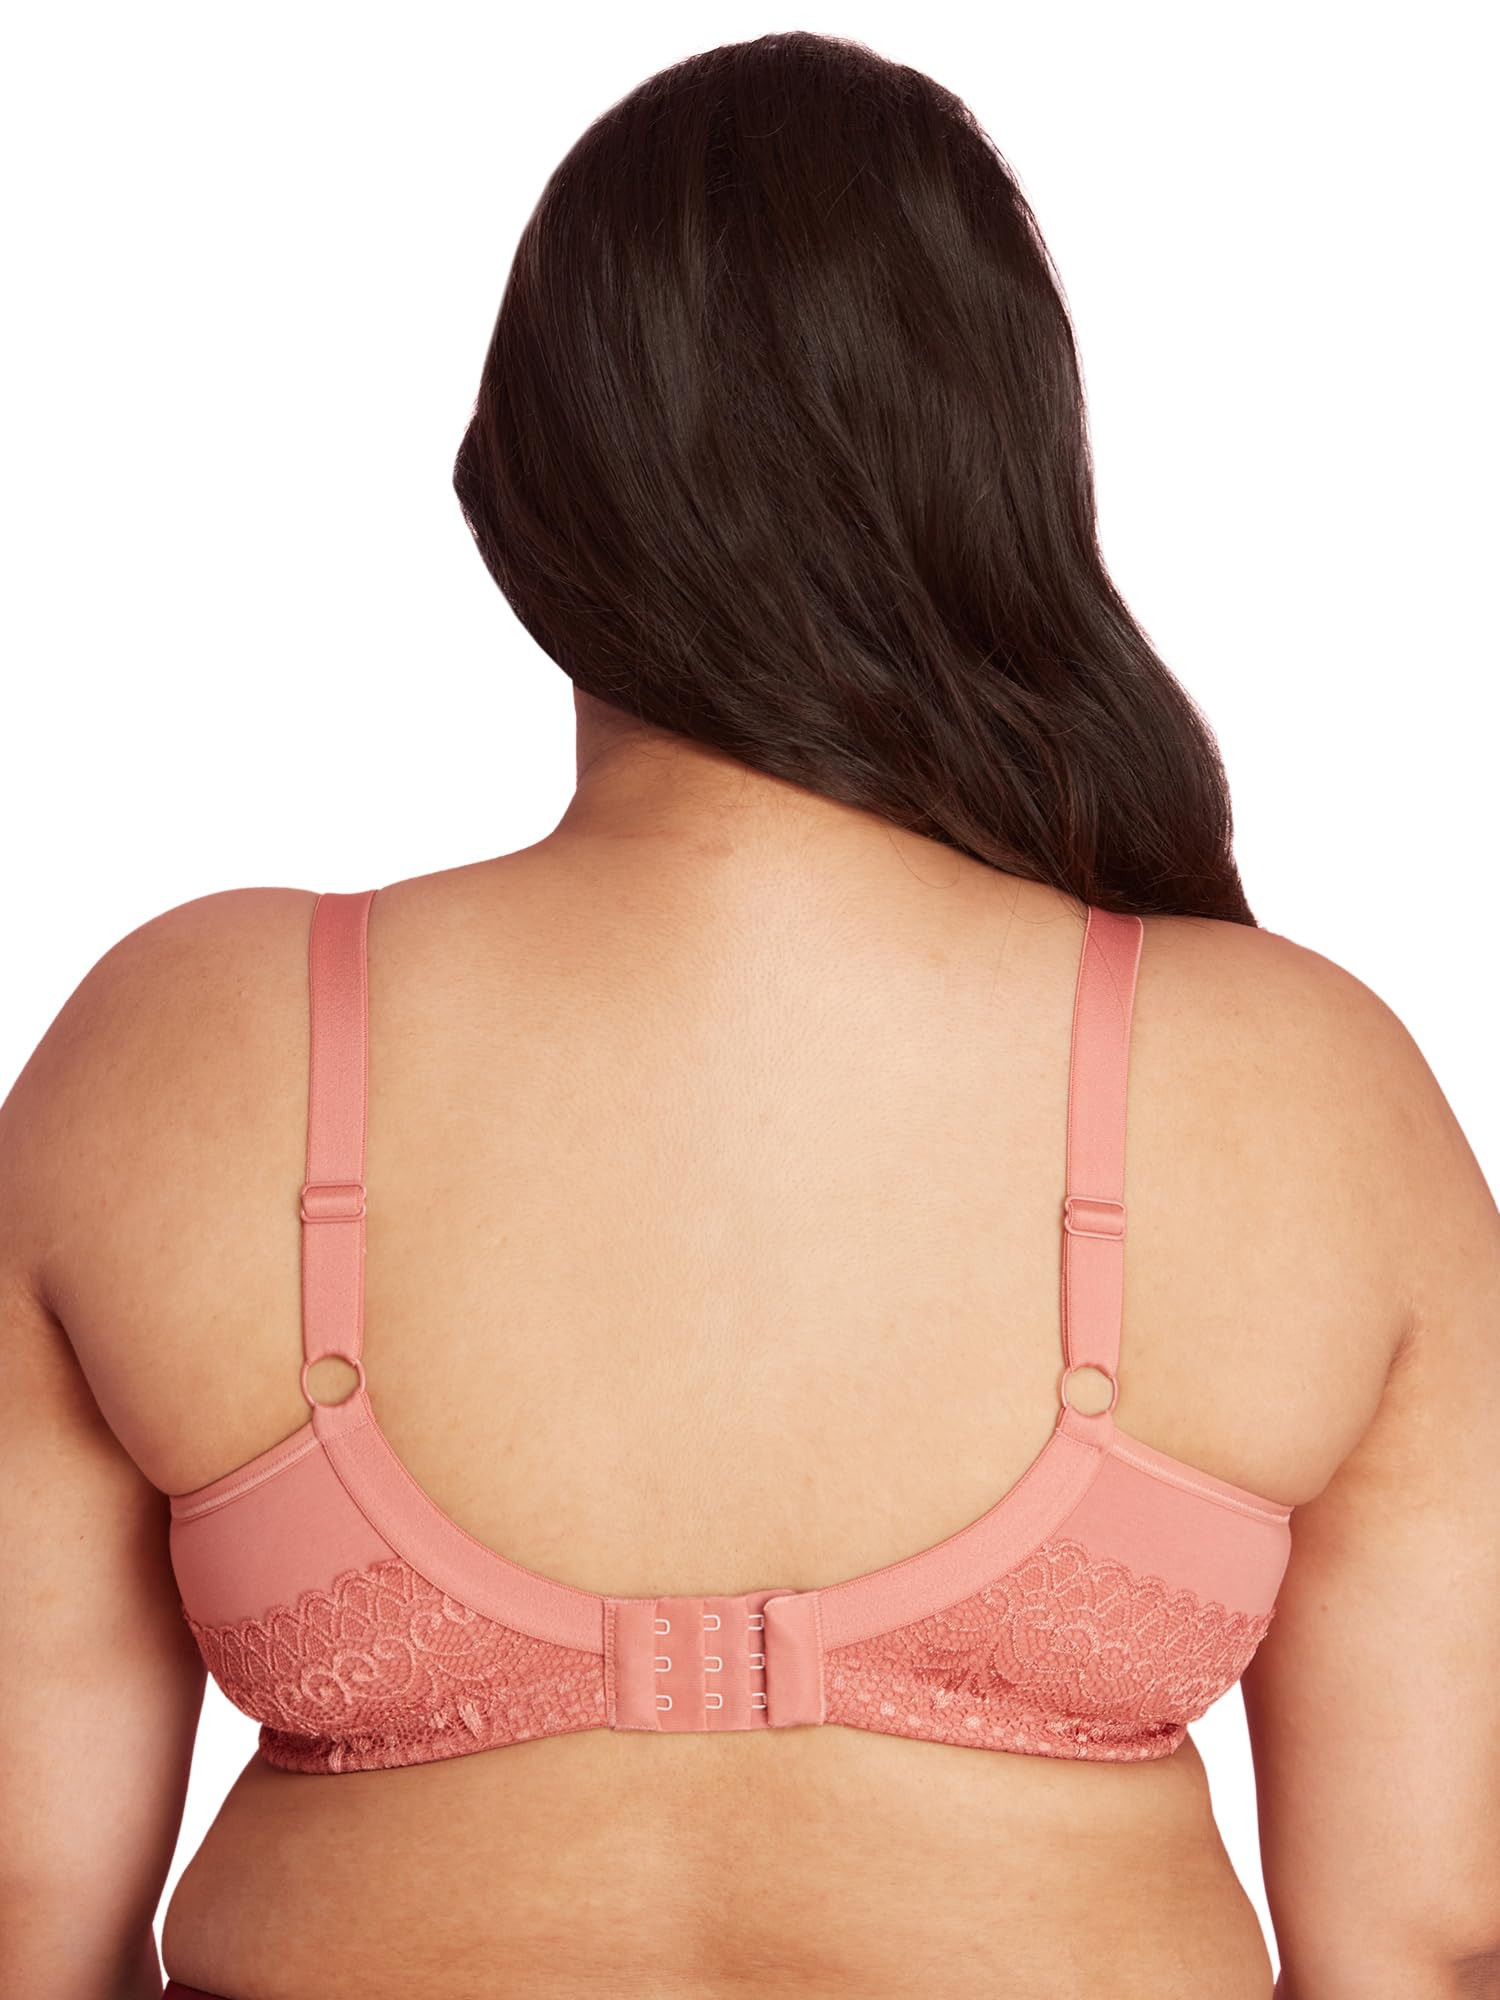 https://www.zebrs.com/uploads/zebrs/products/nykd-by-nykaa-womens-full-support-m-frame-heavy-bust-everyday-cotton-bra--non-padded--wireless--full-coverage-minimizer-bra-nyb101-mauve-34d-1nsize-34d-156716638240047_l.jpg